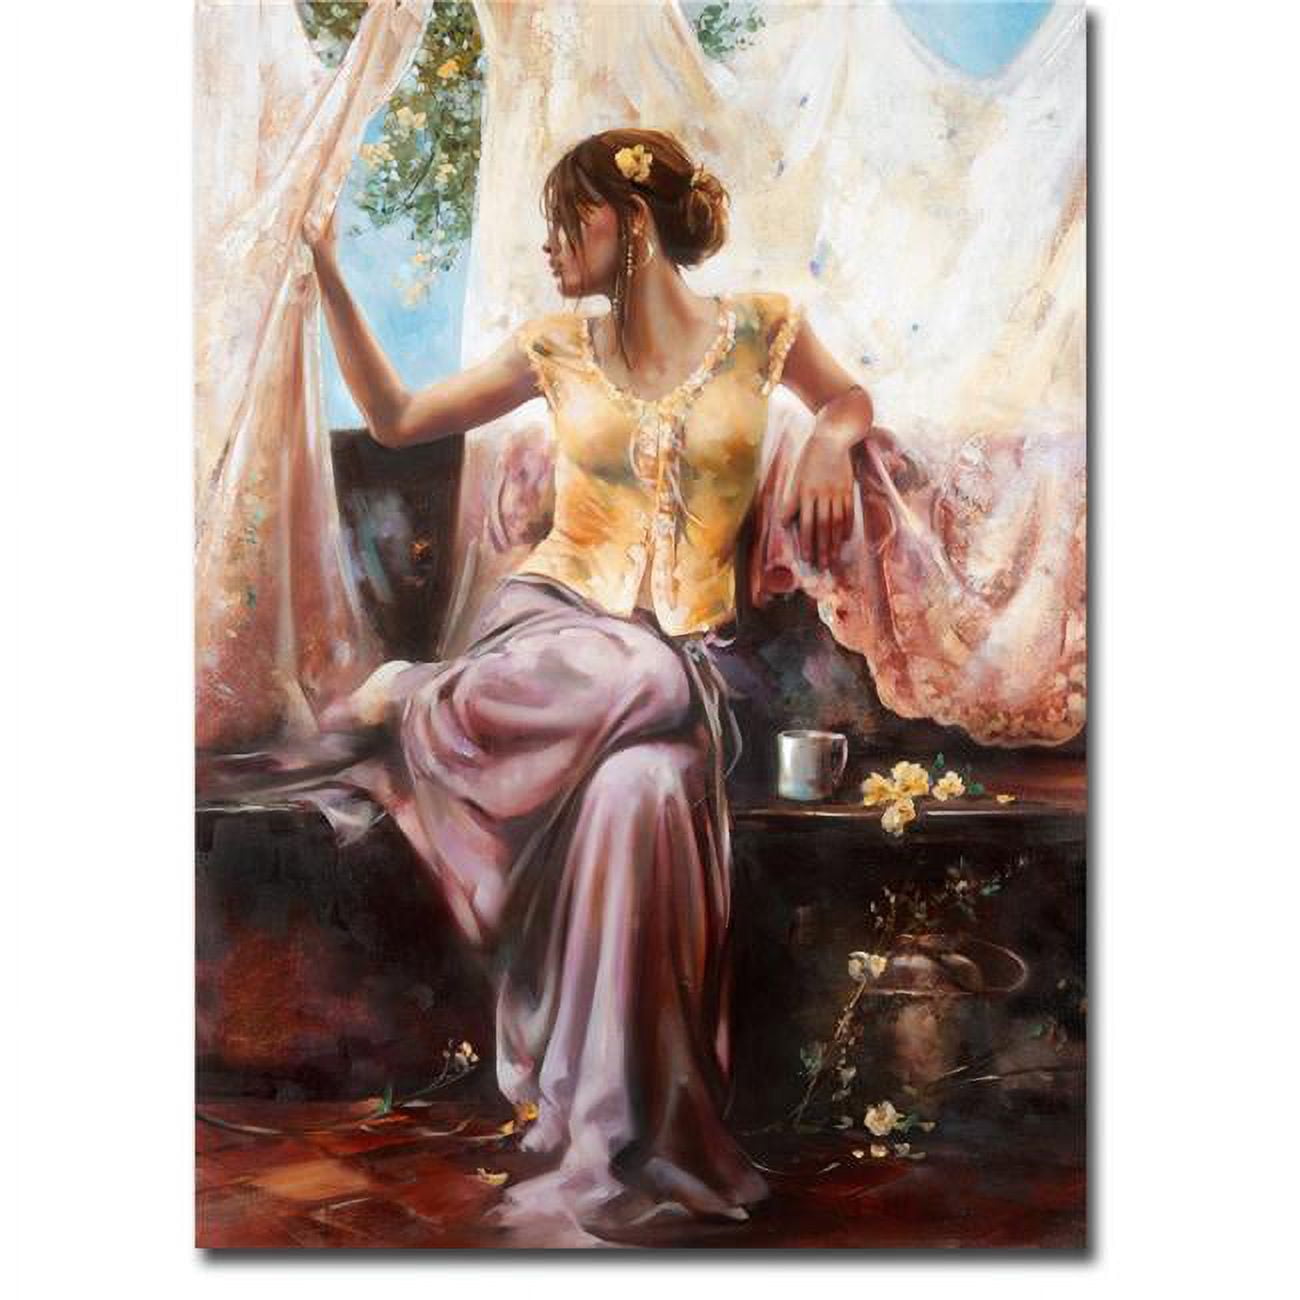 1216985tg Morning Splendor By Ron Di Scenza Premium Gallery-wrapped Canvas Giclee Art - 16 X 12 In.